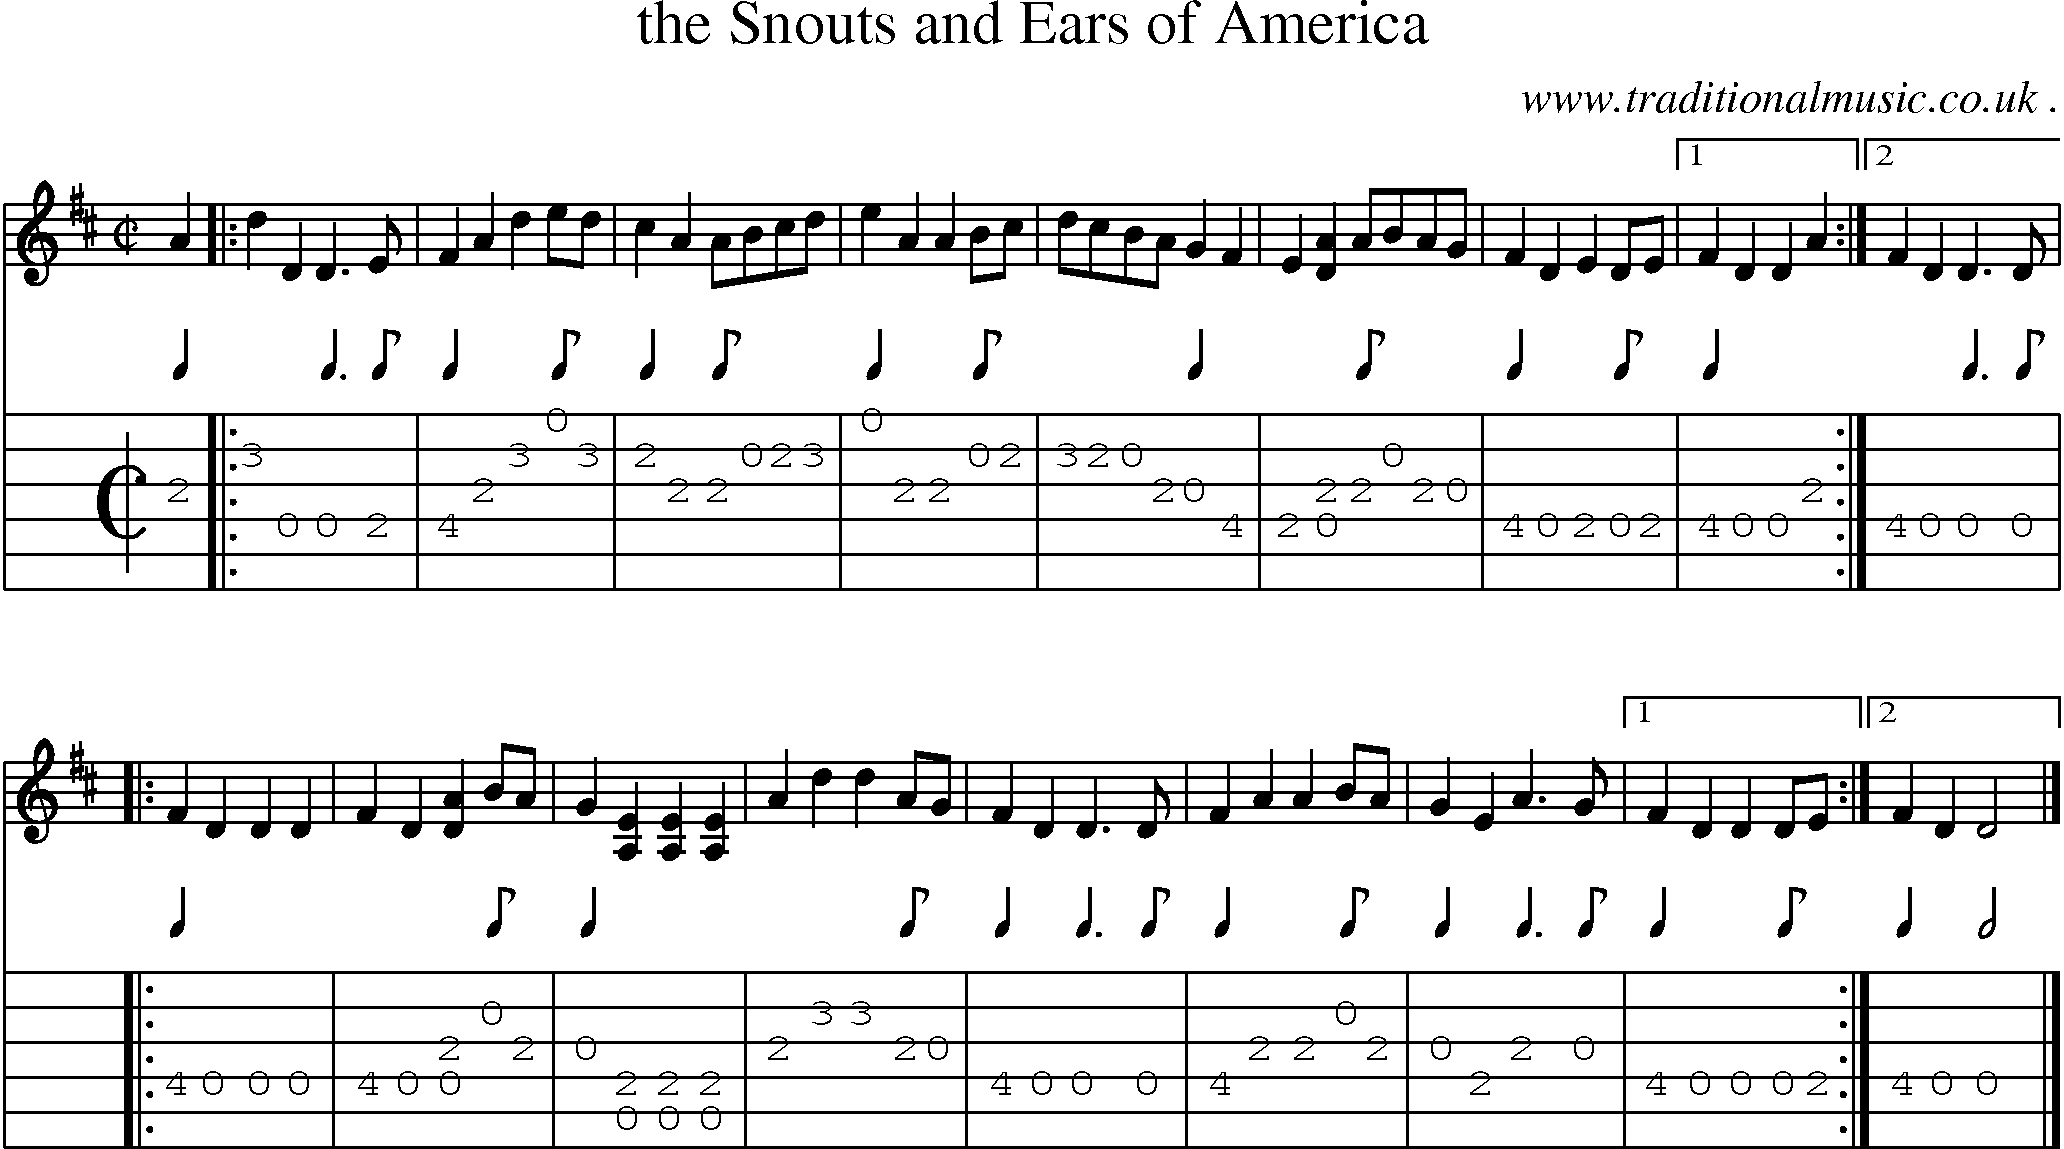 Sheet-music  score, Chords and Guitar Tabs for The Snouts And Ears Of America